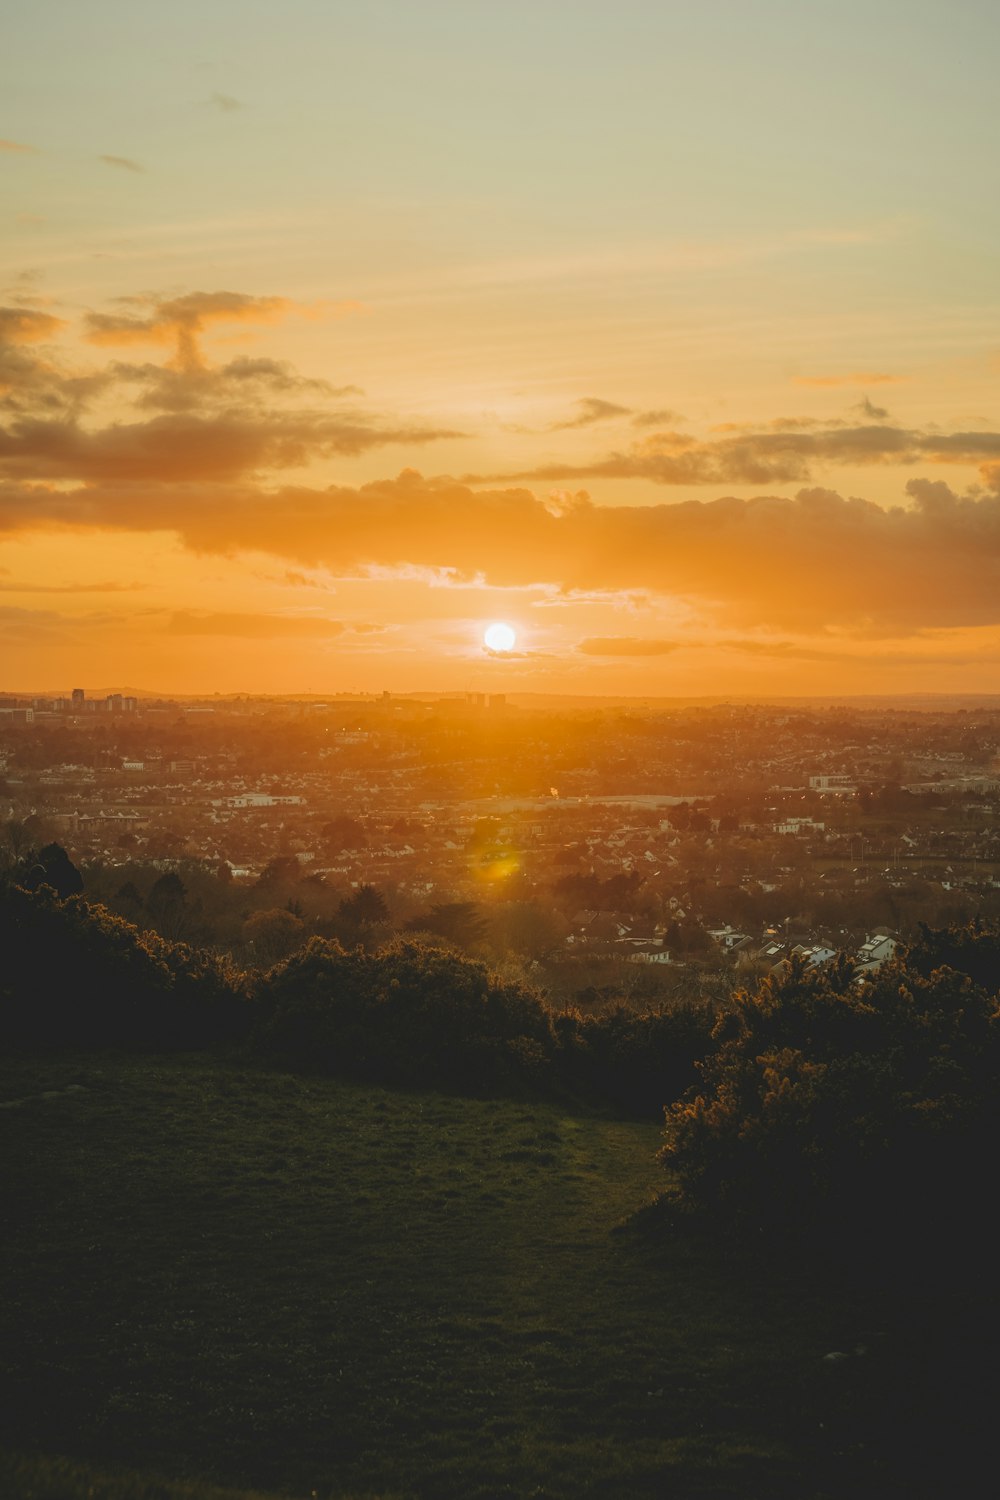 the sun is setting over a city and hills